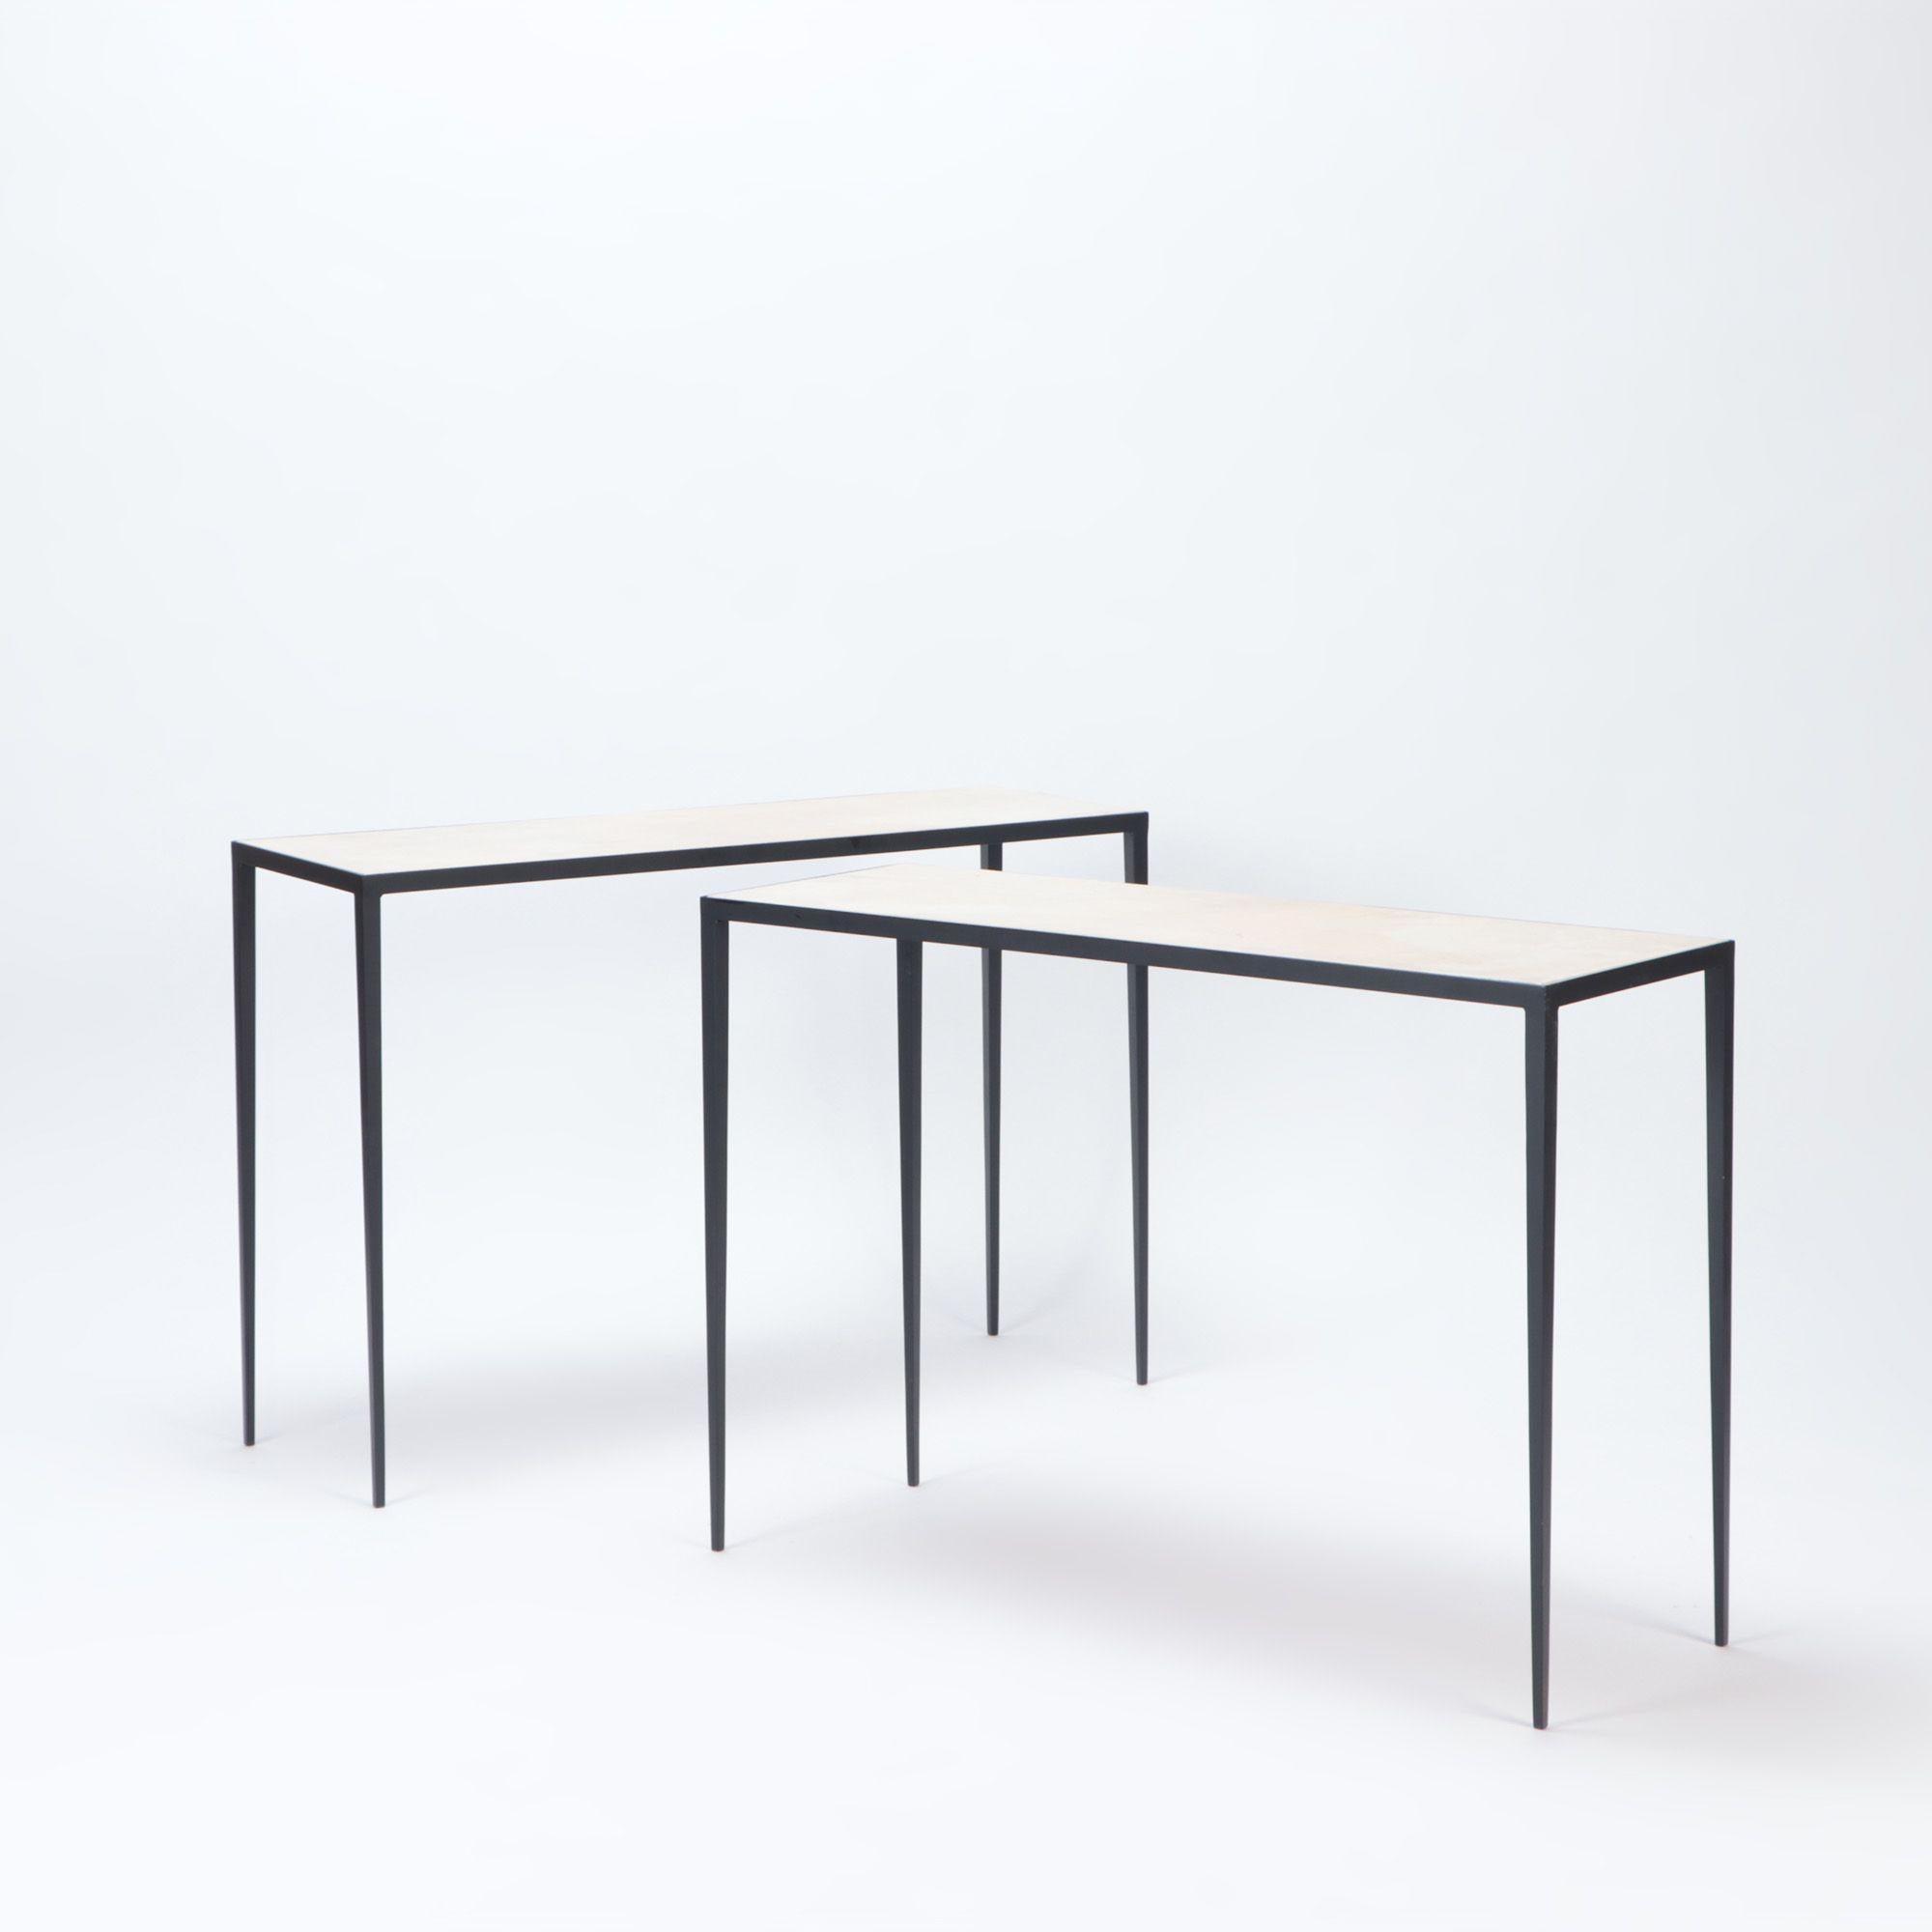 A pair of iron and parchment consoles with parchment tops fitted onto slender matte black wrought iron bases. In the manner of Jean-Michel Frank. Contemporary.